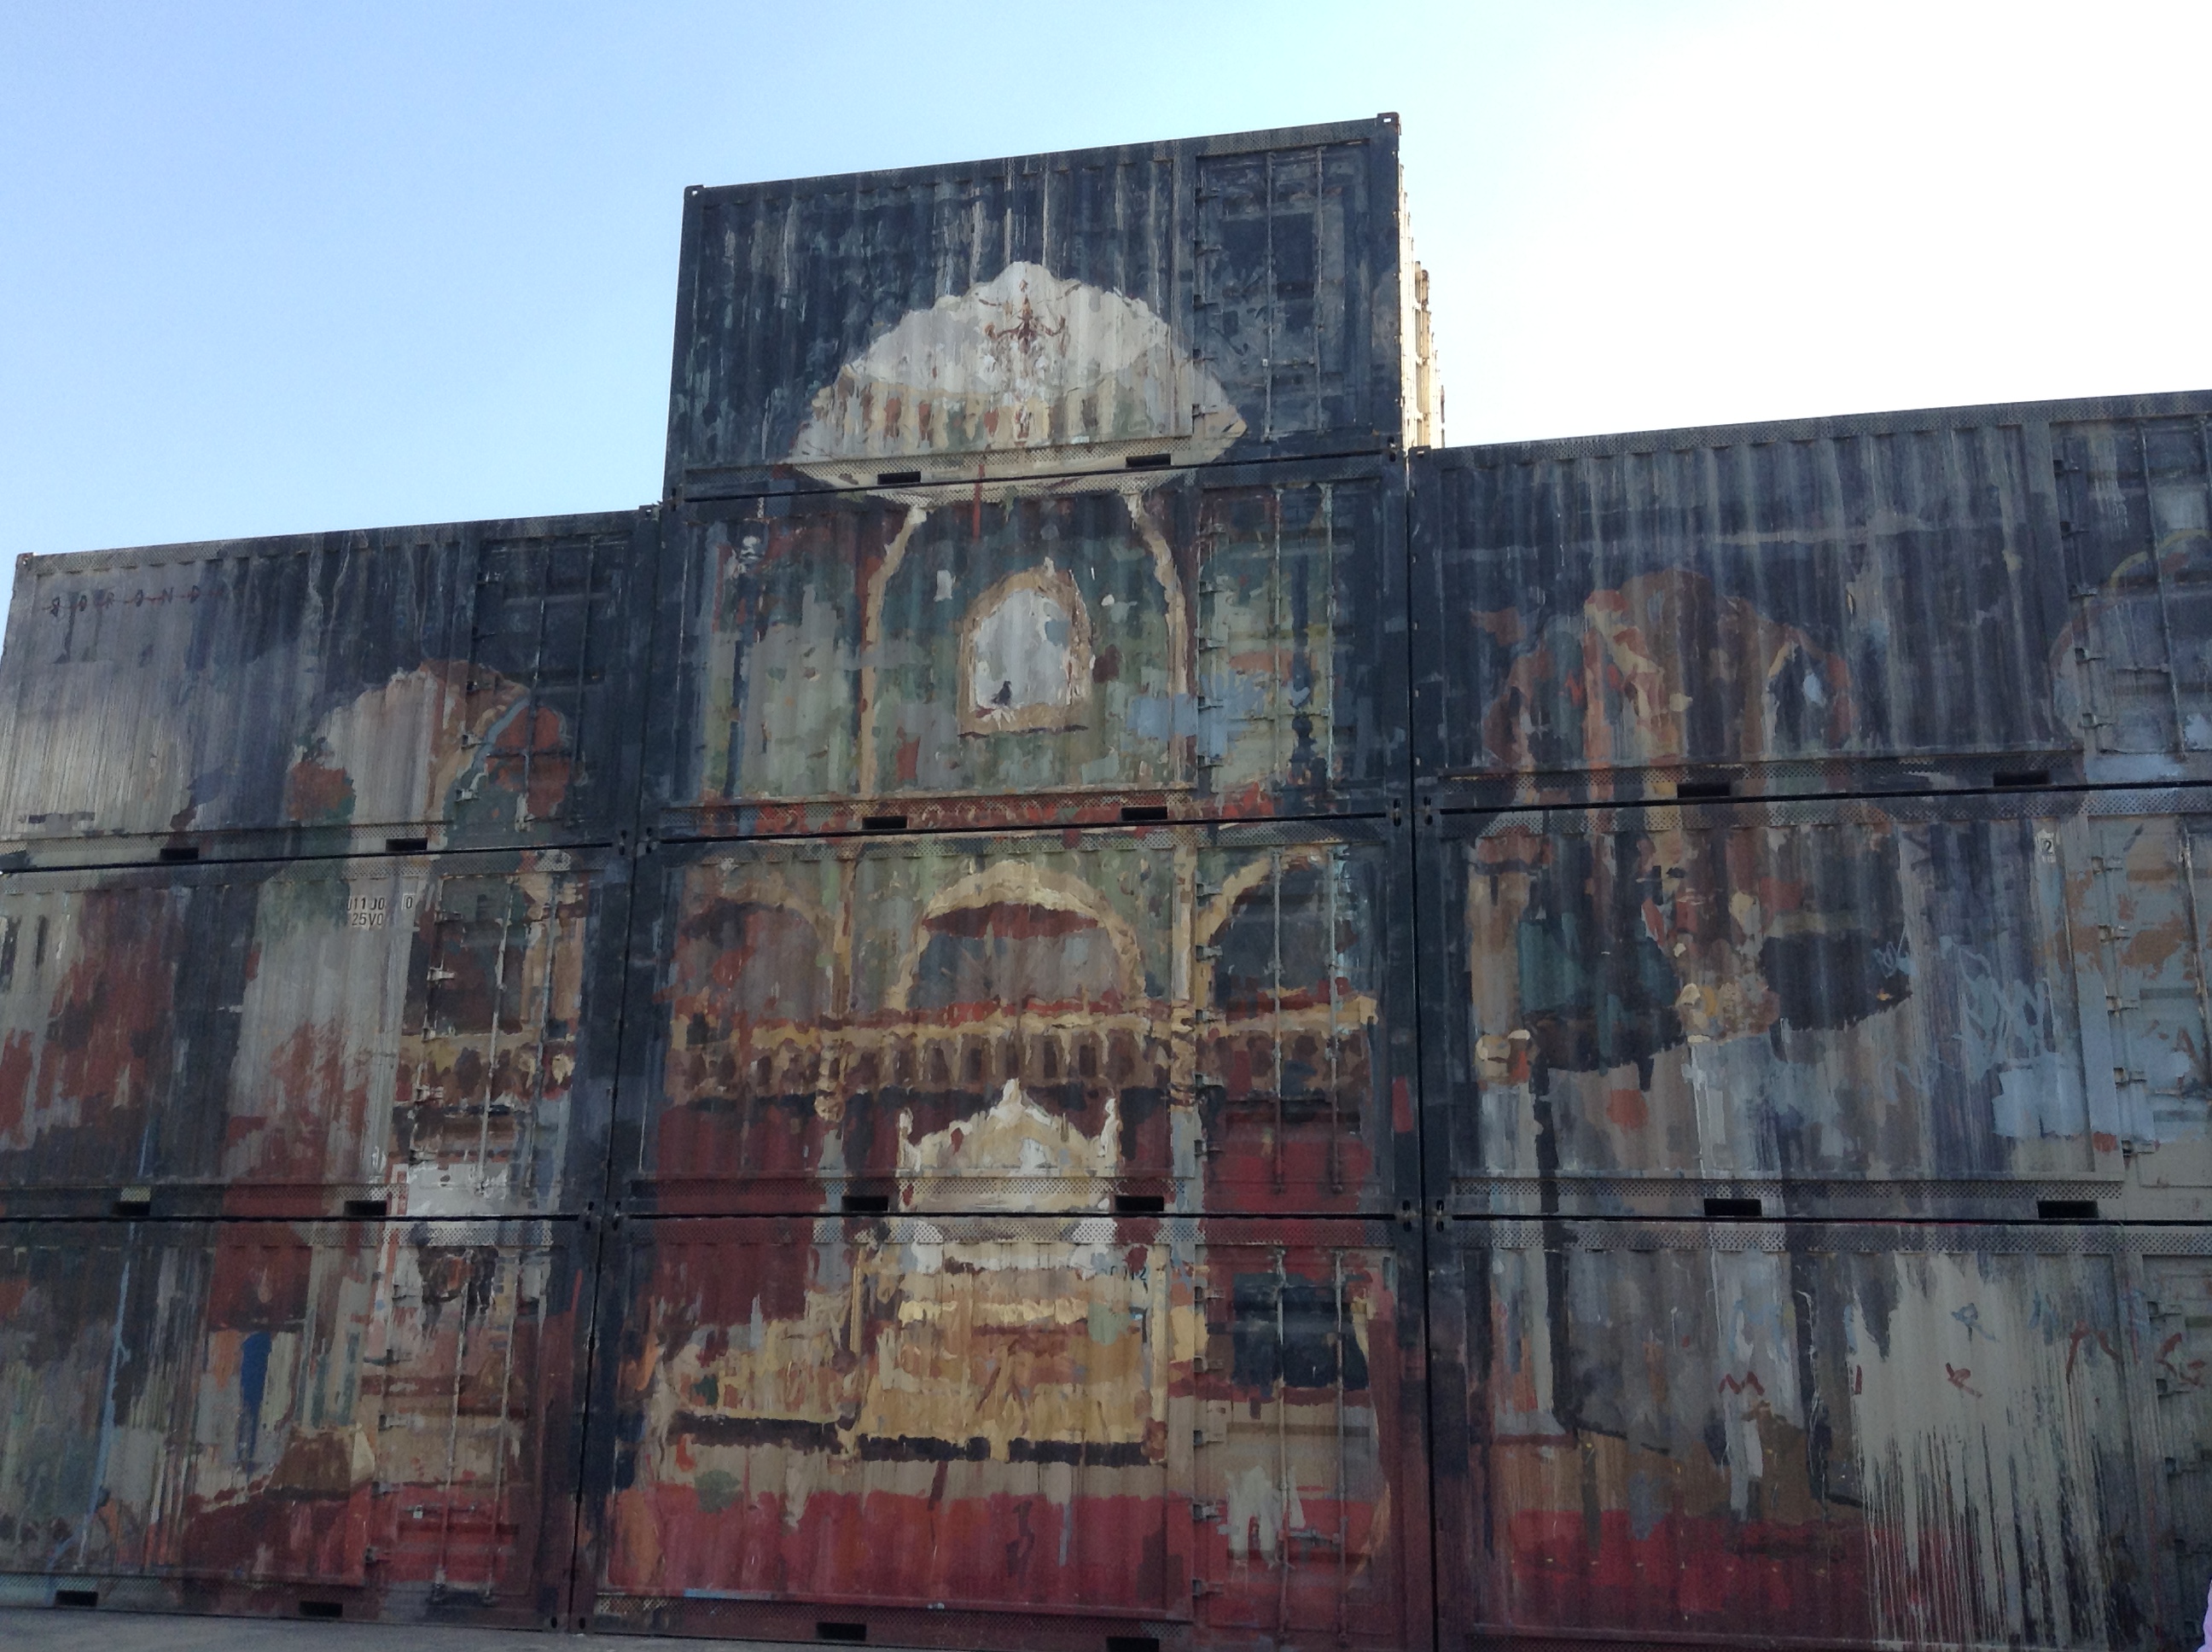 The Mysore Palace painted on 10 containers